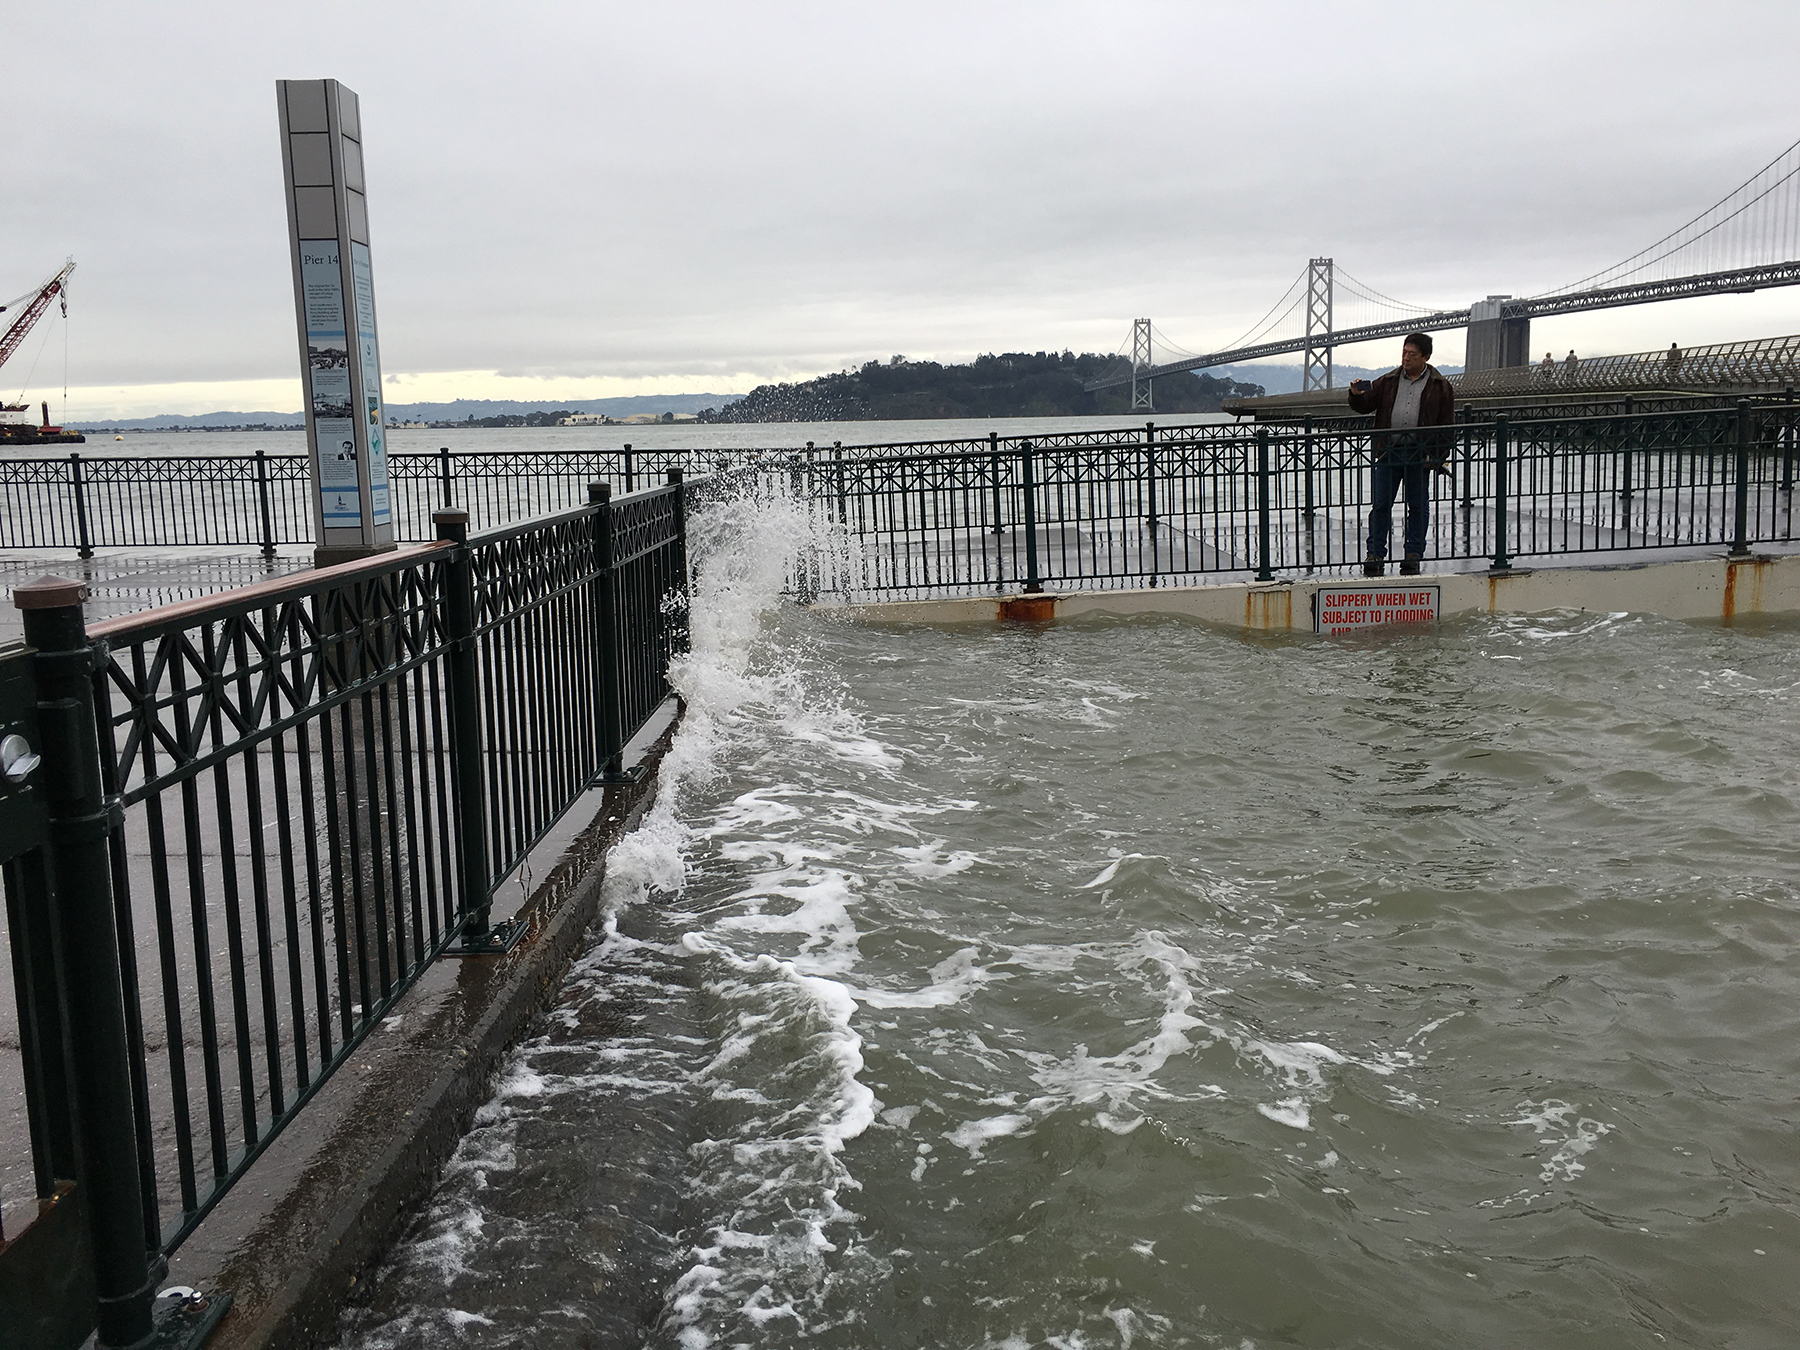 Coastal flooding events like this 2016 king tide in San Francisco are likely to become more frequent in the coming decades as sea levels rise. (Image courtesy of Chris Martin, Flickr, CC 2.0)